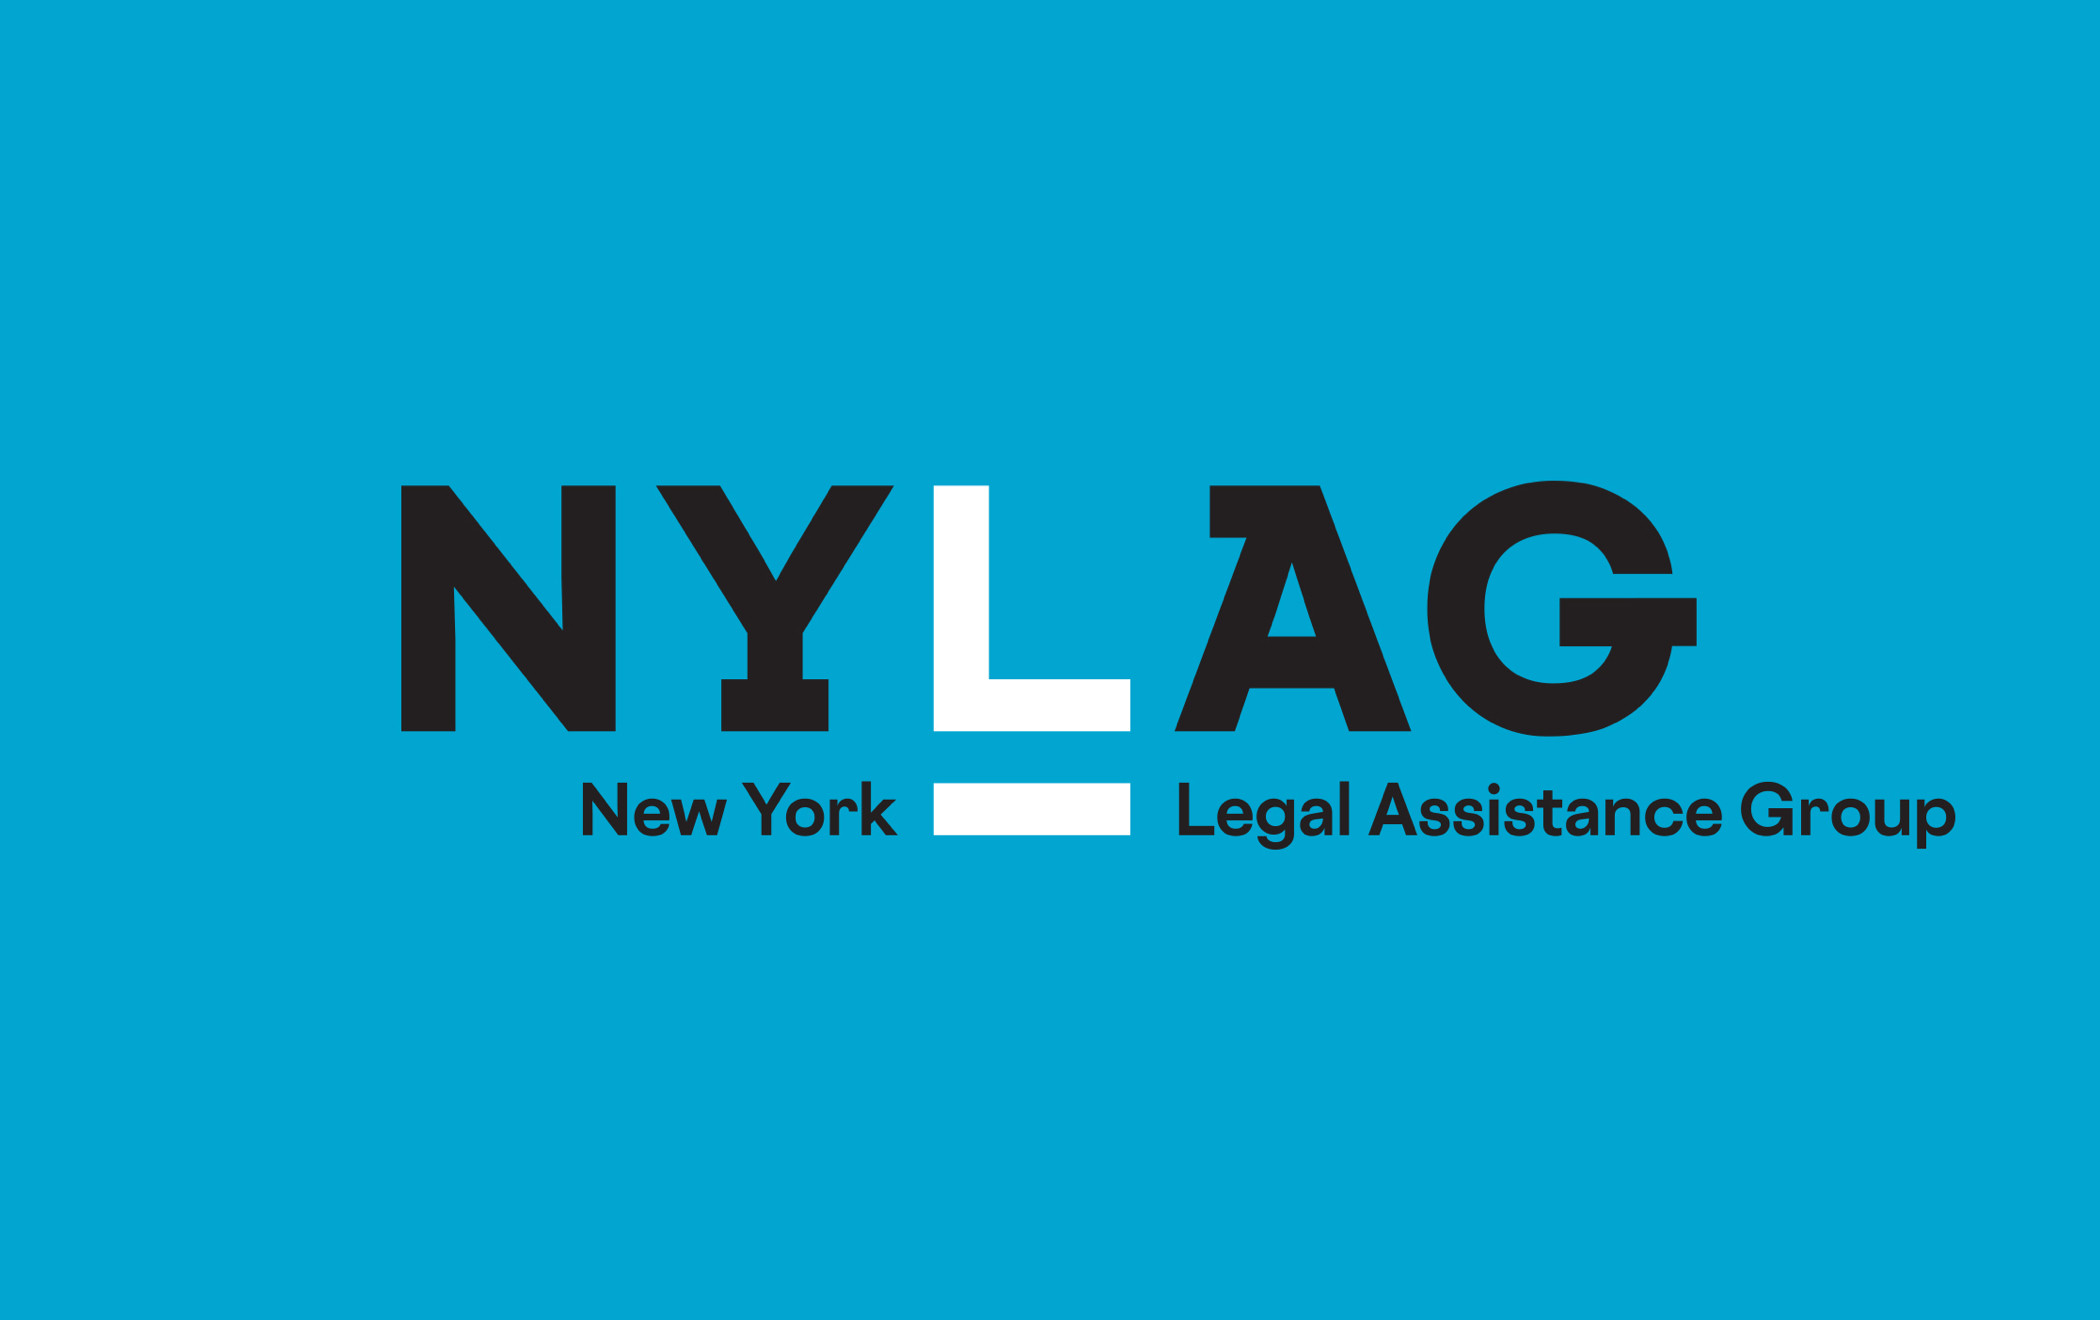 Bright blue square displaying new New York Legal Assistance Group logotype, with "New York Legal Assistance Group" underneath